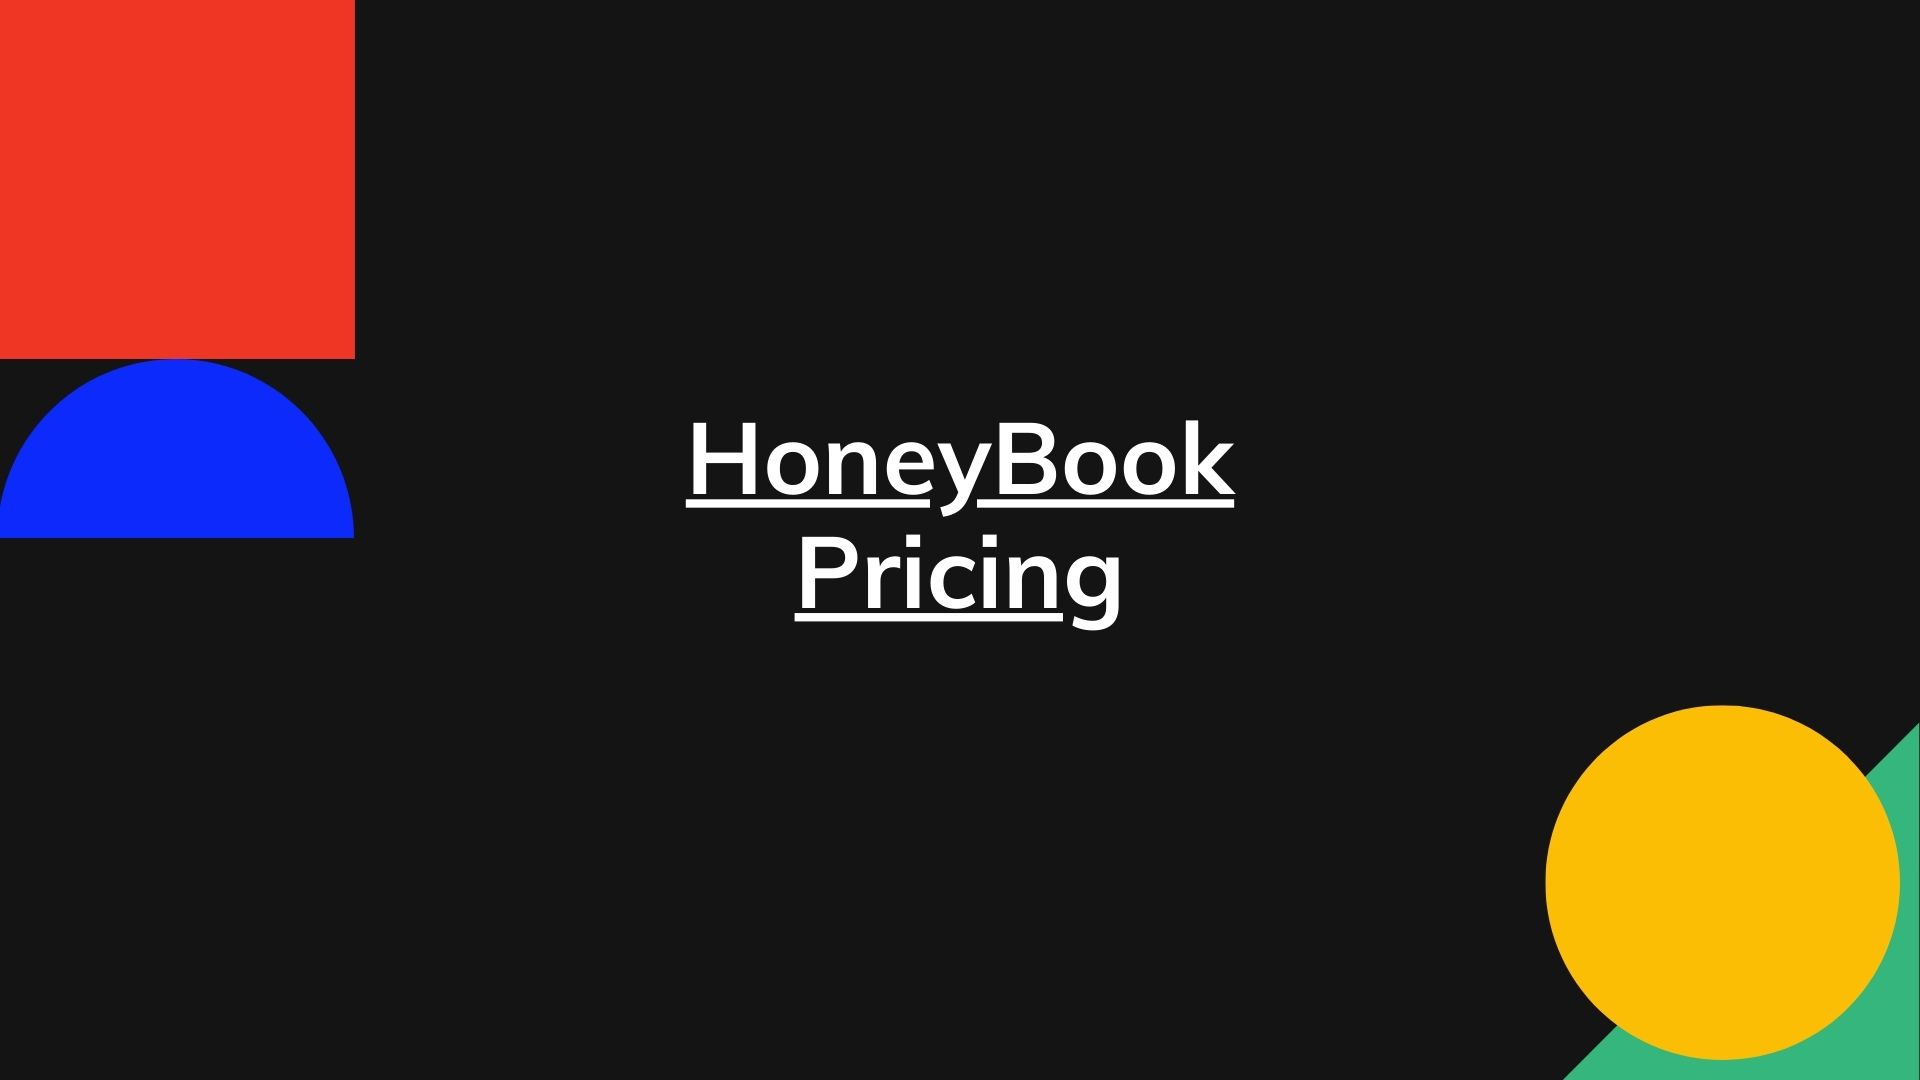 HoneyBook Pricing – Actual prices for all plans